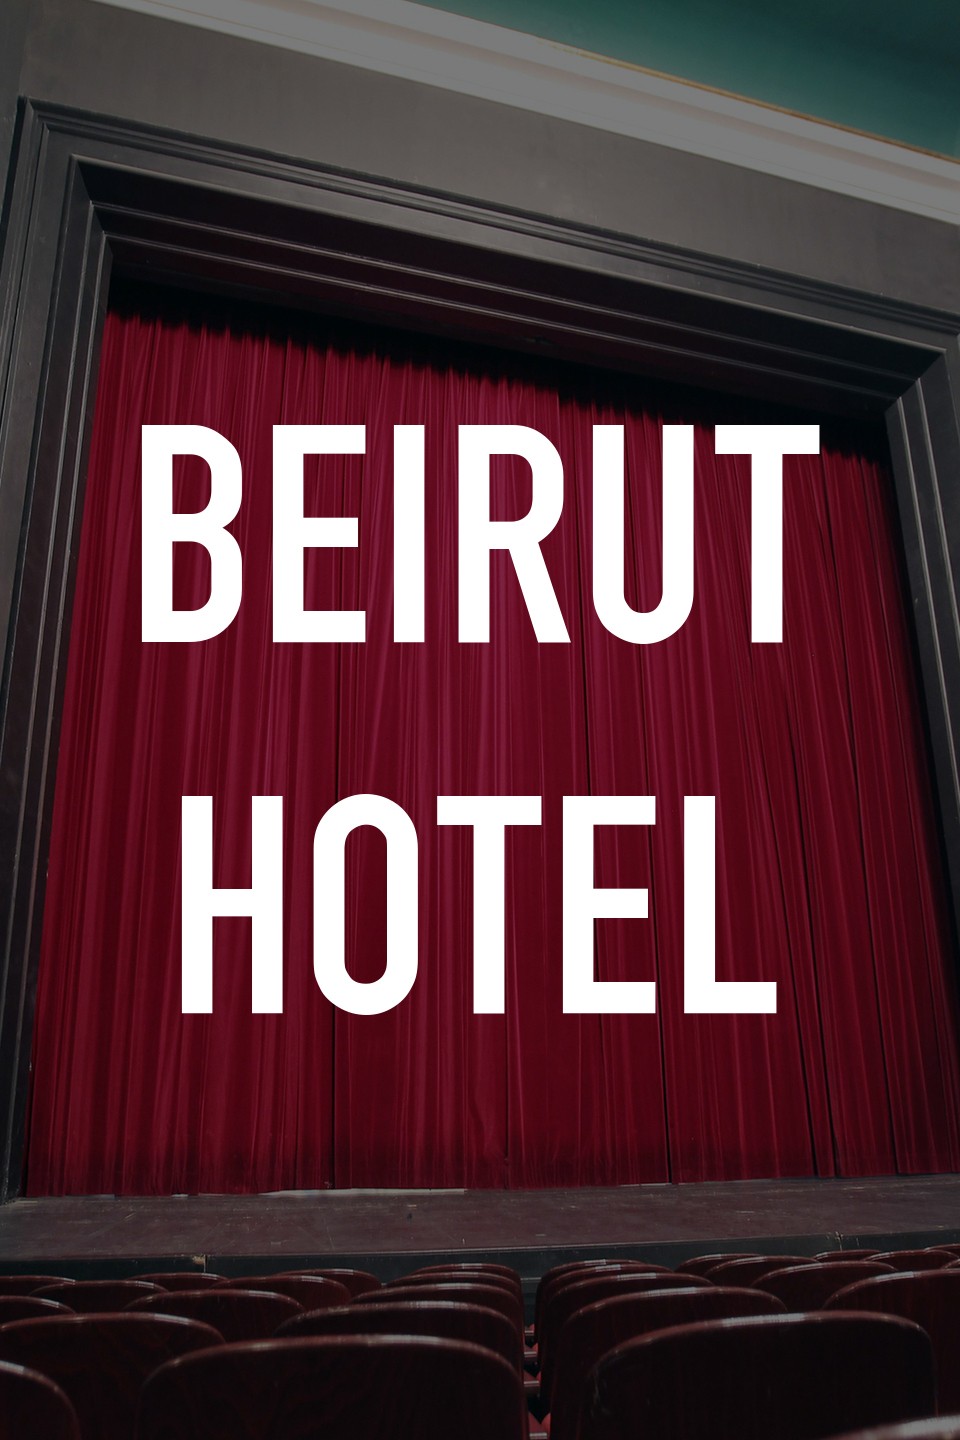 austin keough recommends beirut hotel full movie pic